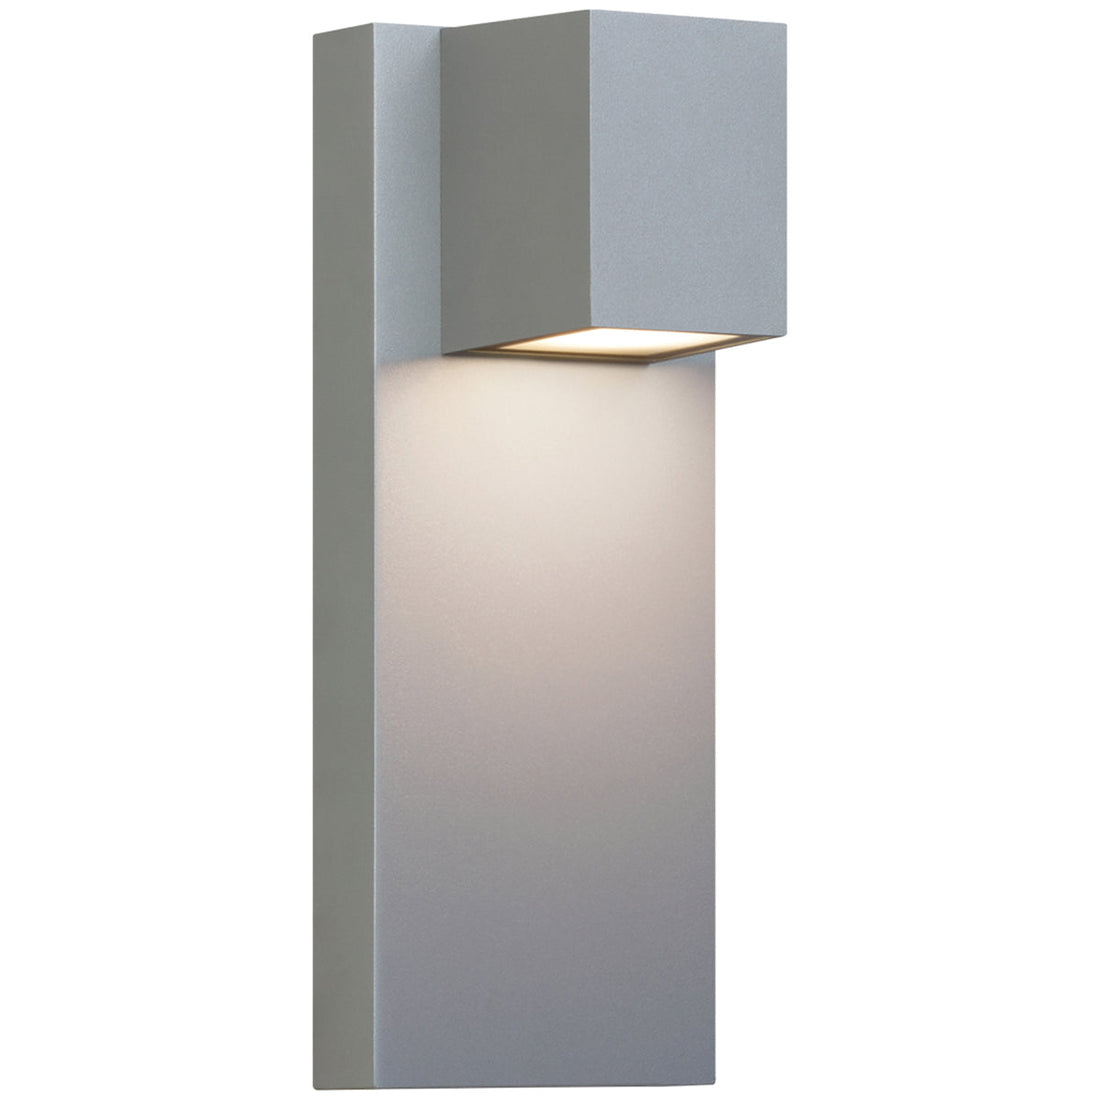 Tech Lighting Quadrate Outdoor Wall Sconce